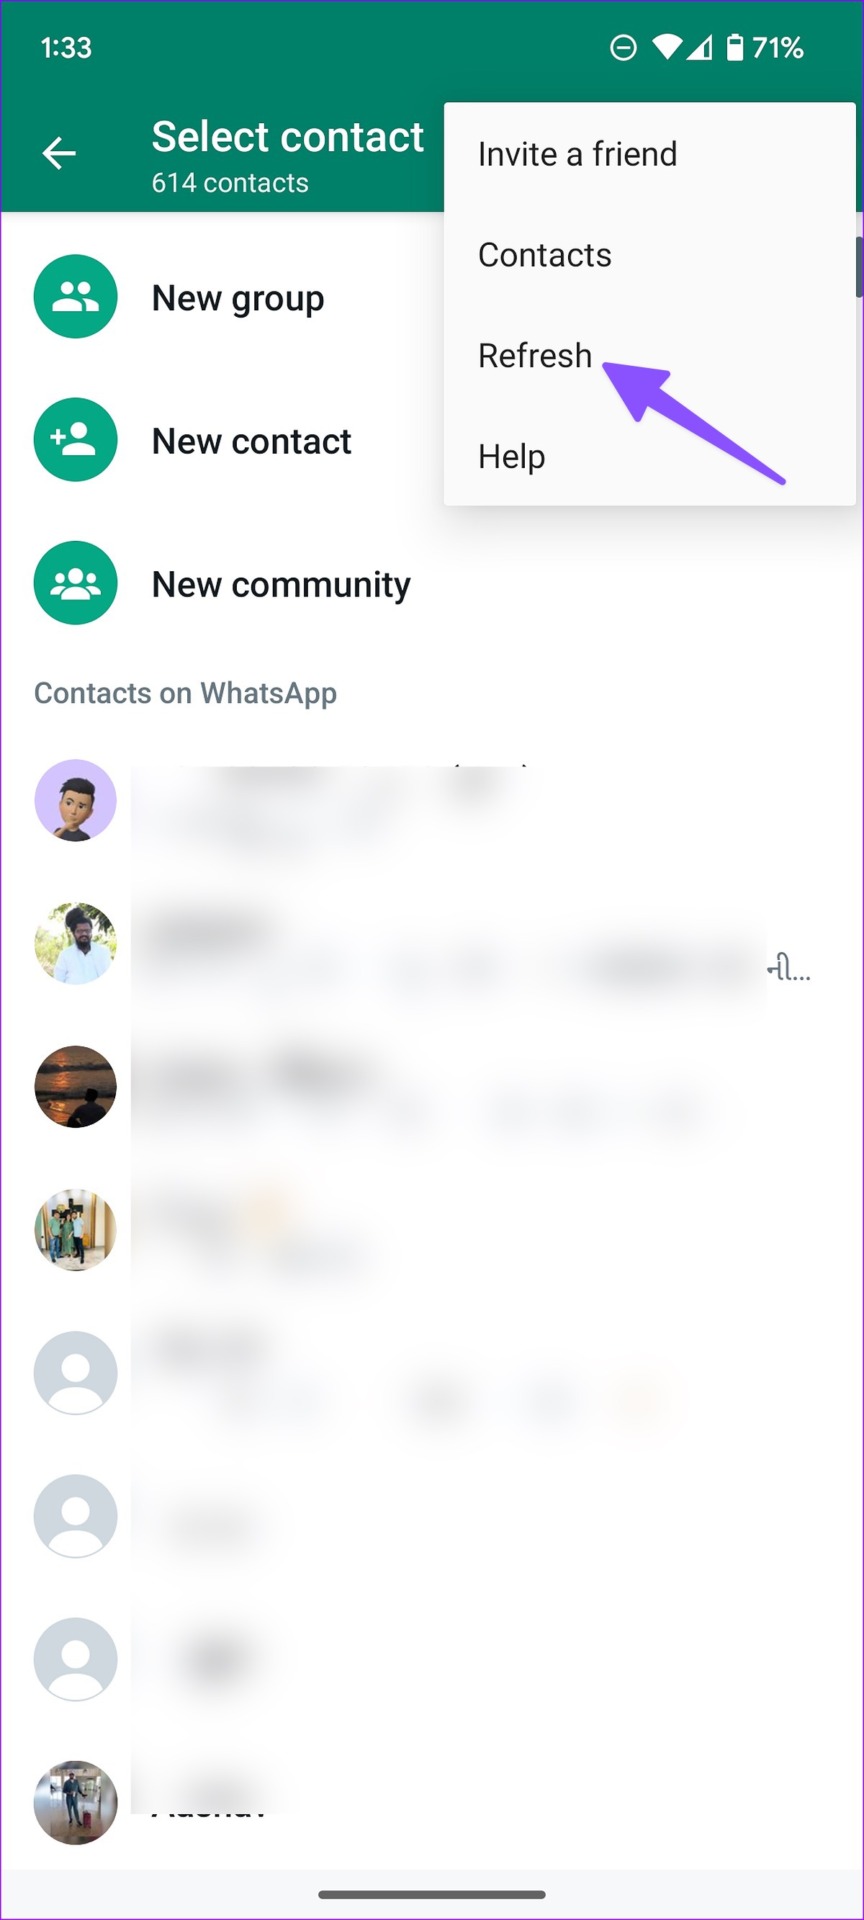 Refresh contacts on WhatsApp